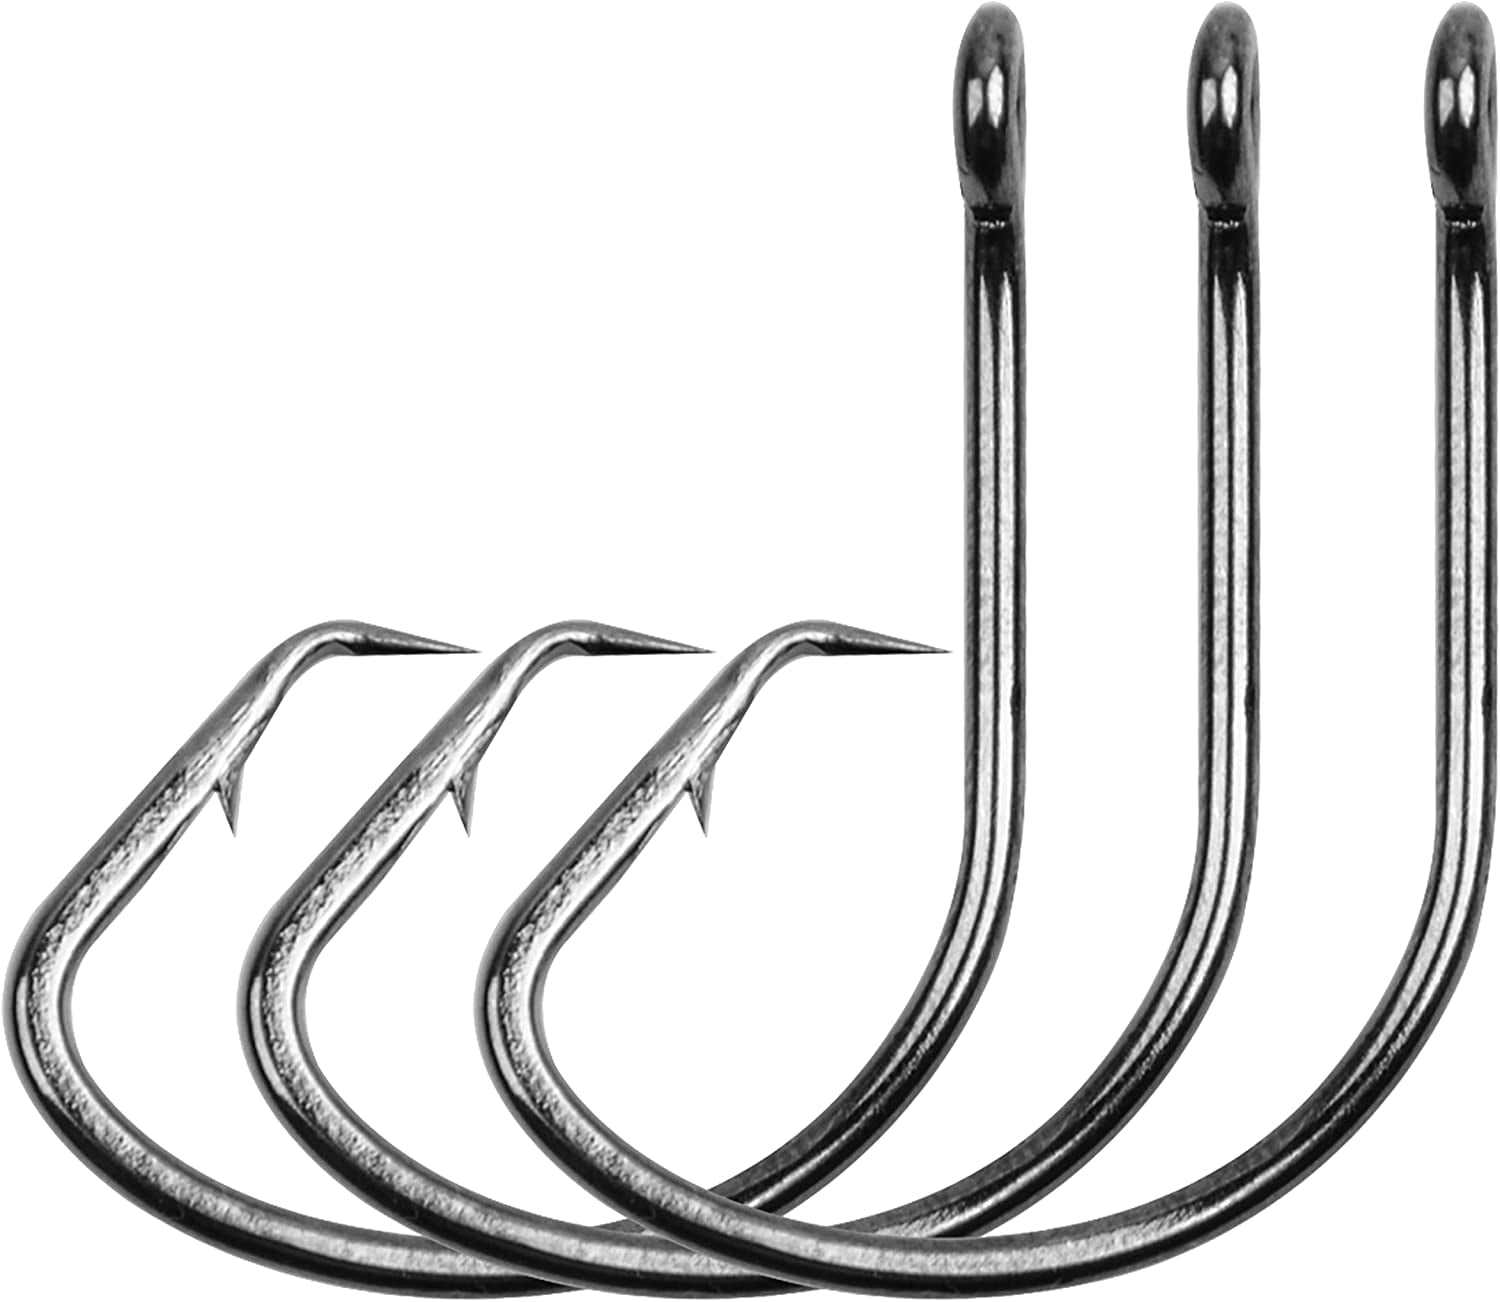  Circle Hooks Saltwater Fishing Hooks Set,110pcs Inline Octopus Circle  Hooks Straight Eye Barbed High Carbon Steel Wire Hook 1/0-5/0 : Sports &  Outdoors